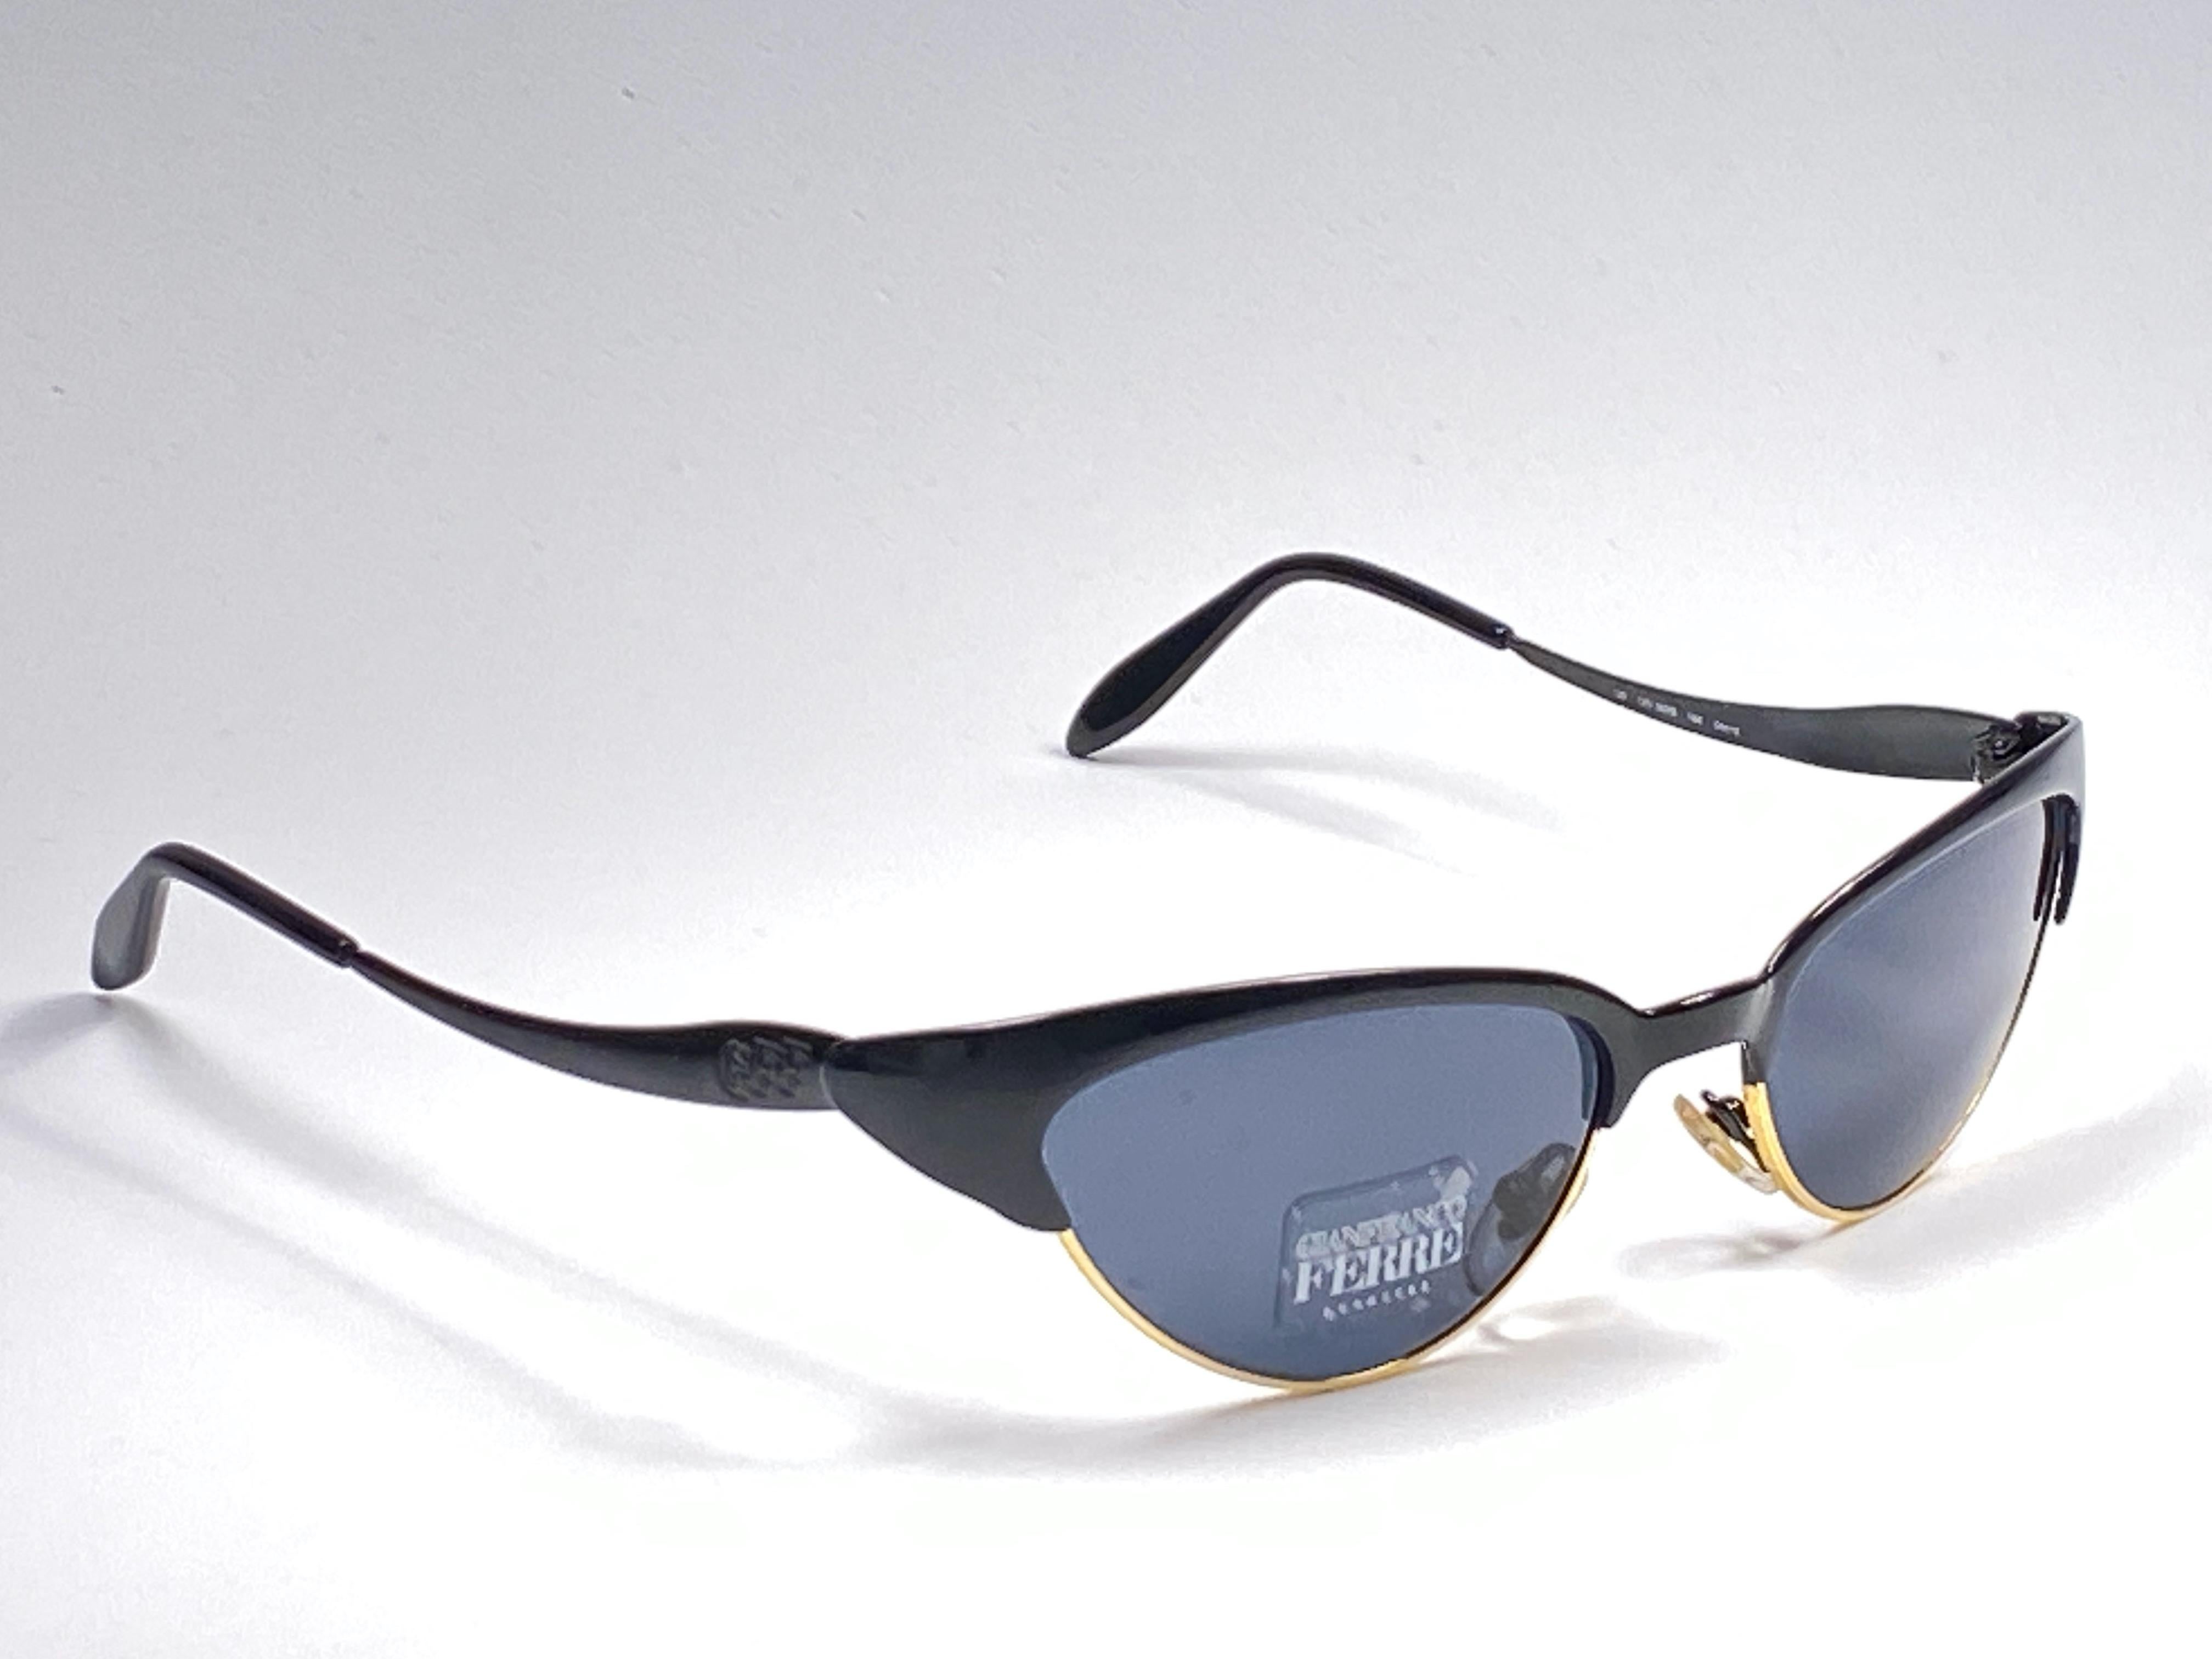 New vintage Gianfranco Ferre sunglasses.

Gold and black details frame holding a pair of spotless grey lenses.   

New, never worn or displayed. 

 Made in Italy.

MEASUREMENTS 



FRONT : 14 CMS

LENS HEIGHT : 3.6 CMS

LENS WIDTH : 5.6 CMS